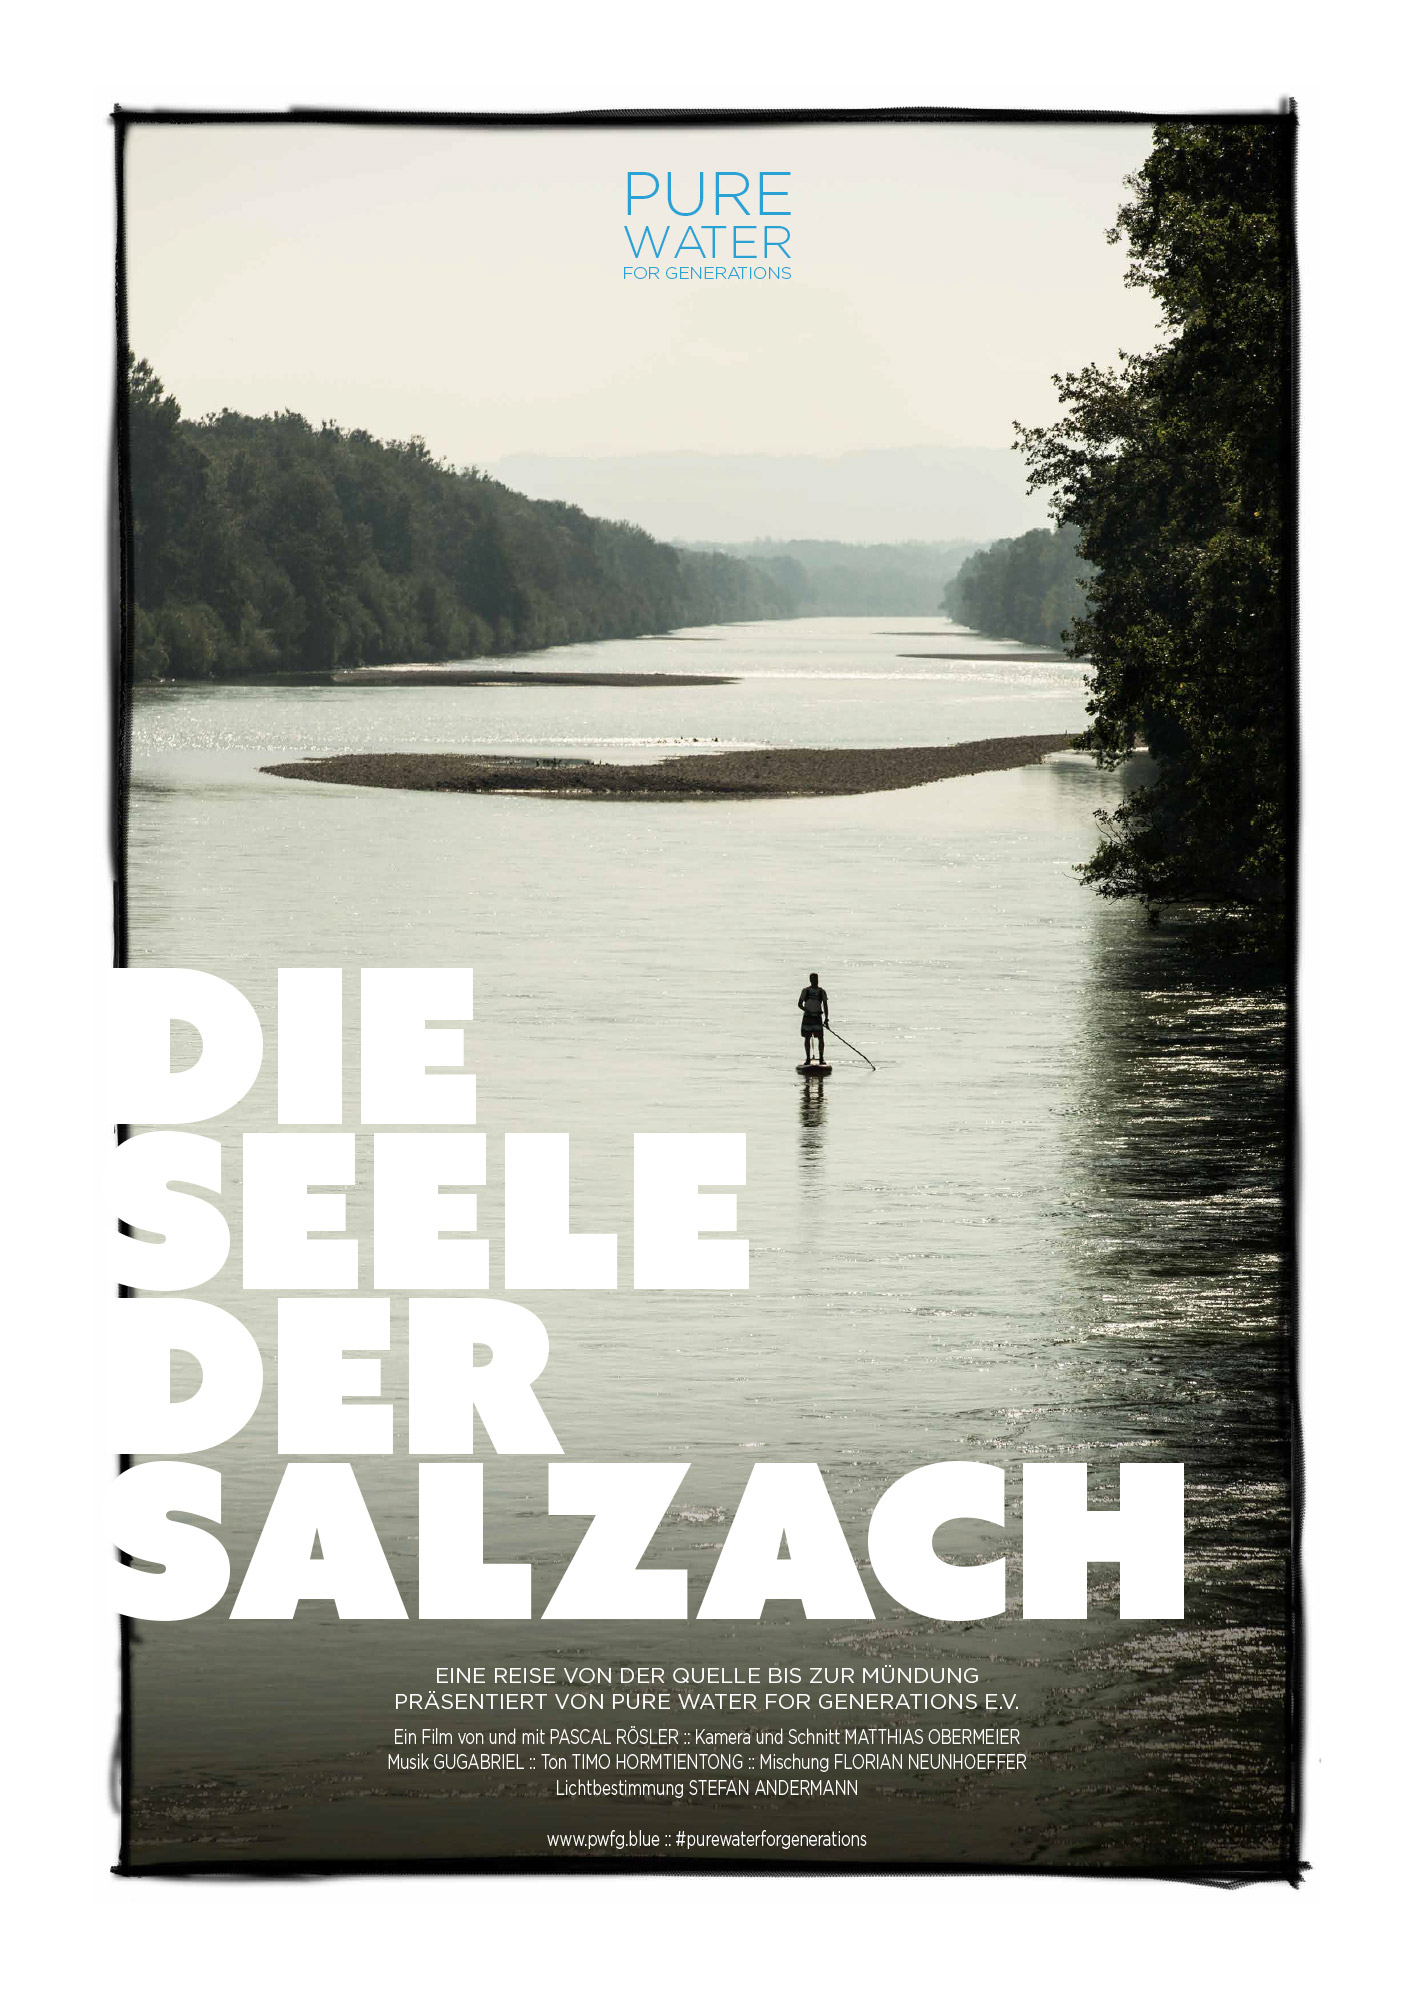 Pure Water for Generations e.V, Die Seele der Salzach, Plakat